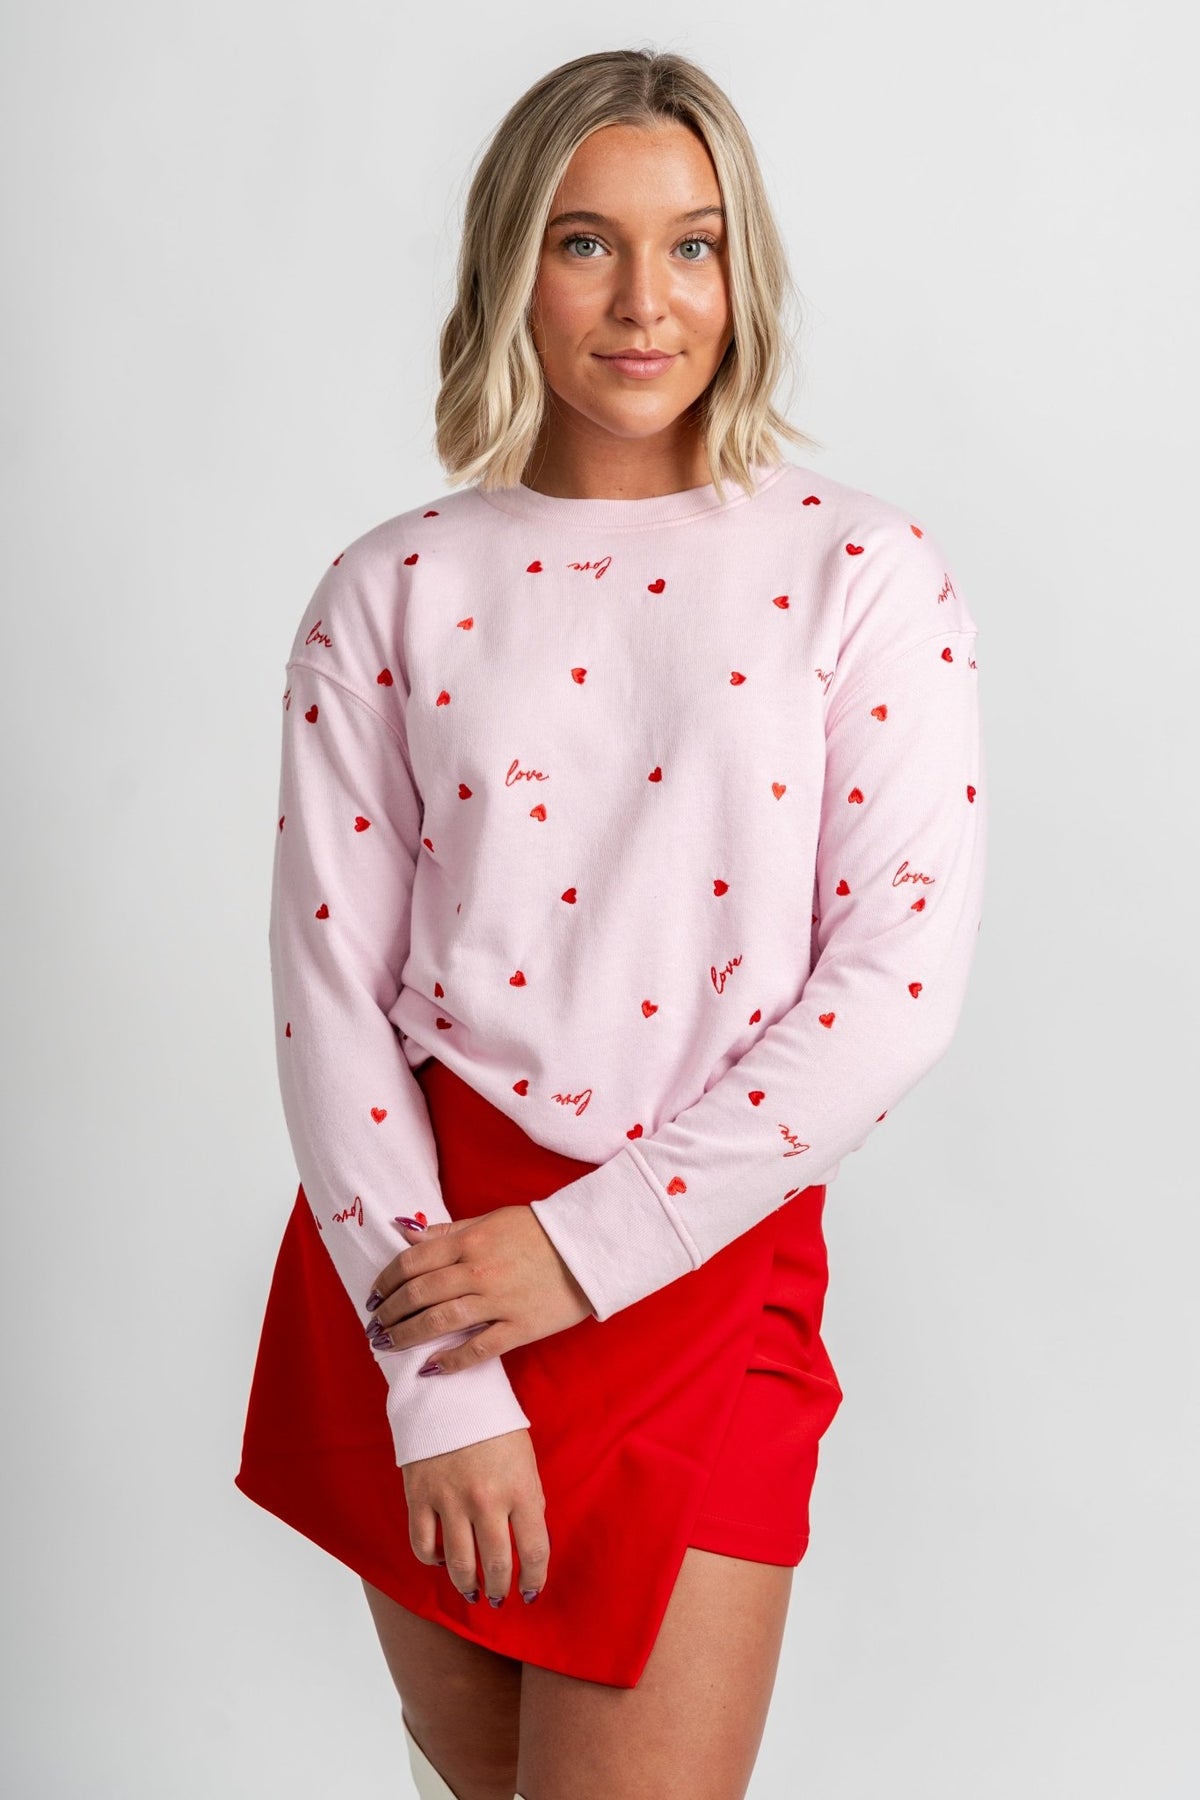 Love hearts sweatshirt blush - Trendy T-Shirts for Valentine's Day at Lush Fashion Lounge Boutique in Oklahoma City